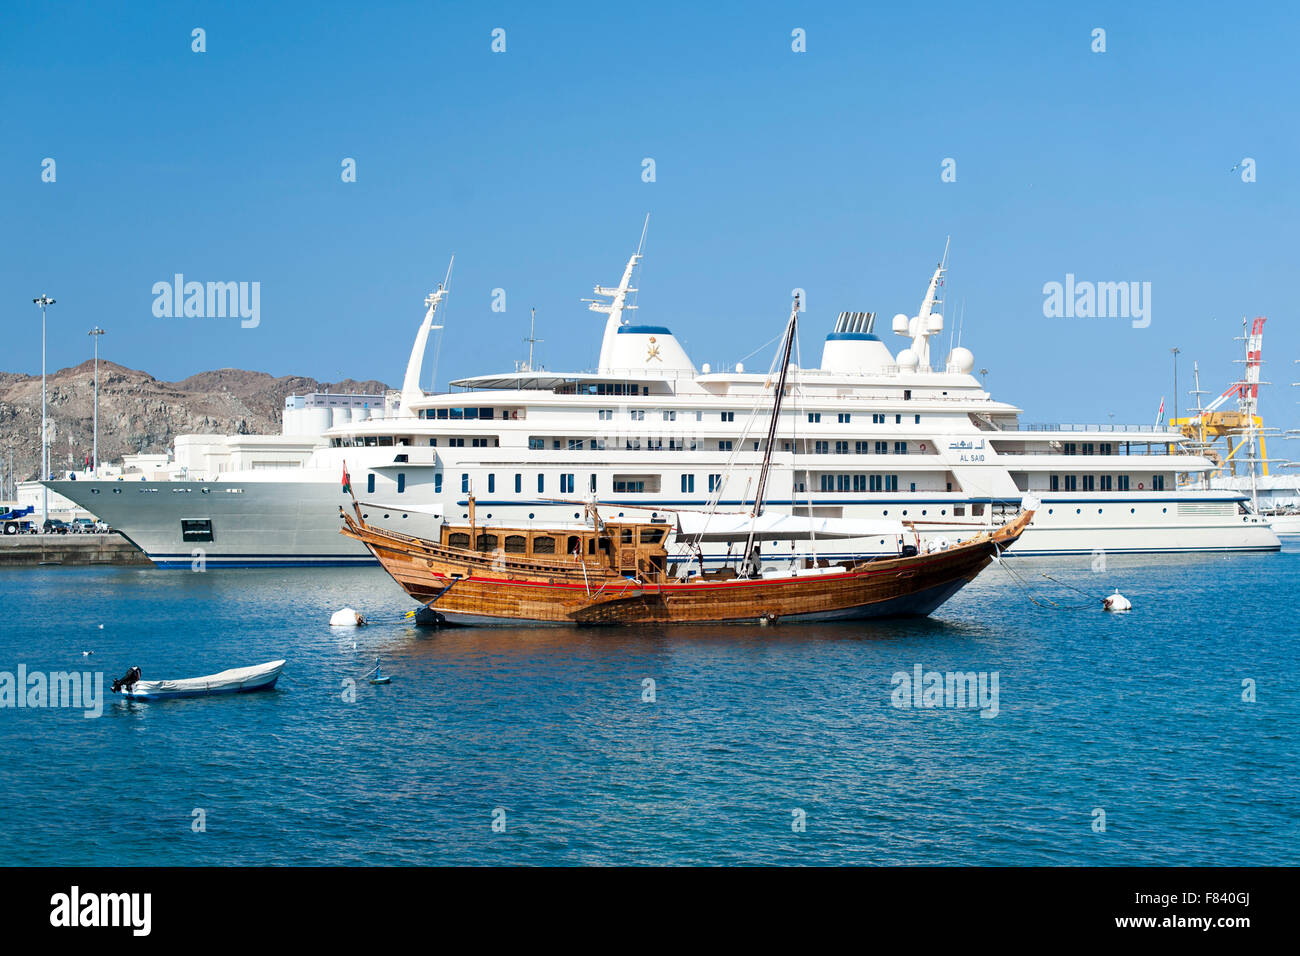 Wooden boat moored alongside the super yacht of the Sultan of Oman in Mutrah harbour, Muscat. Stock Photo